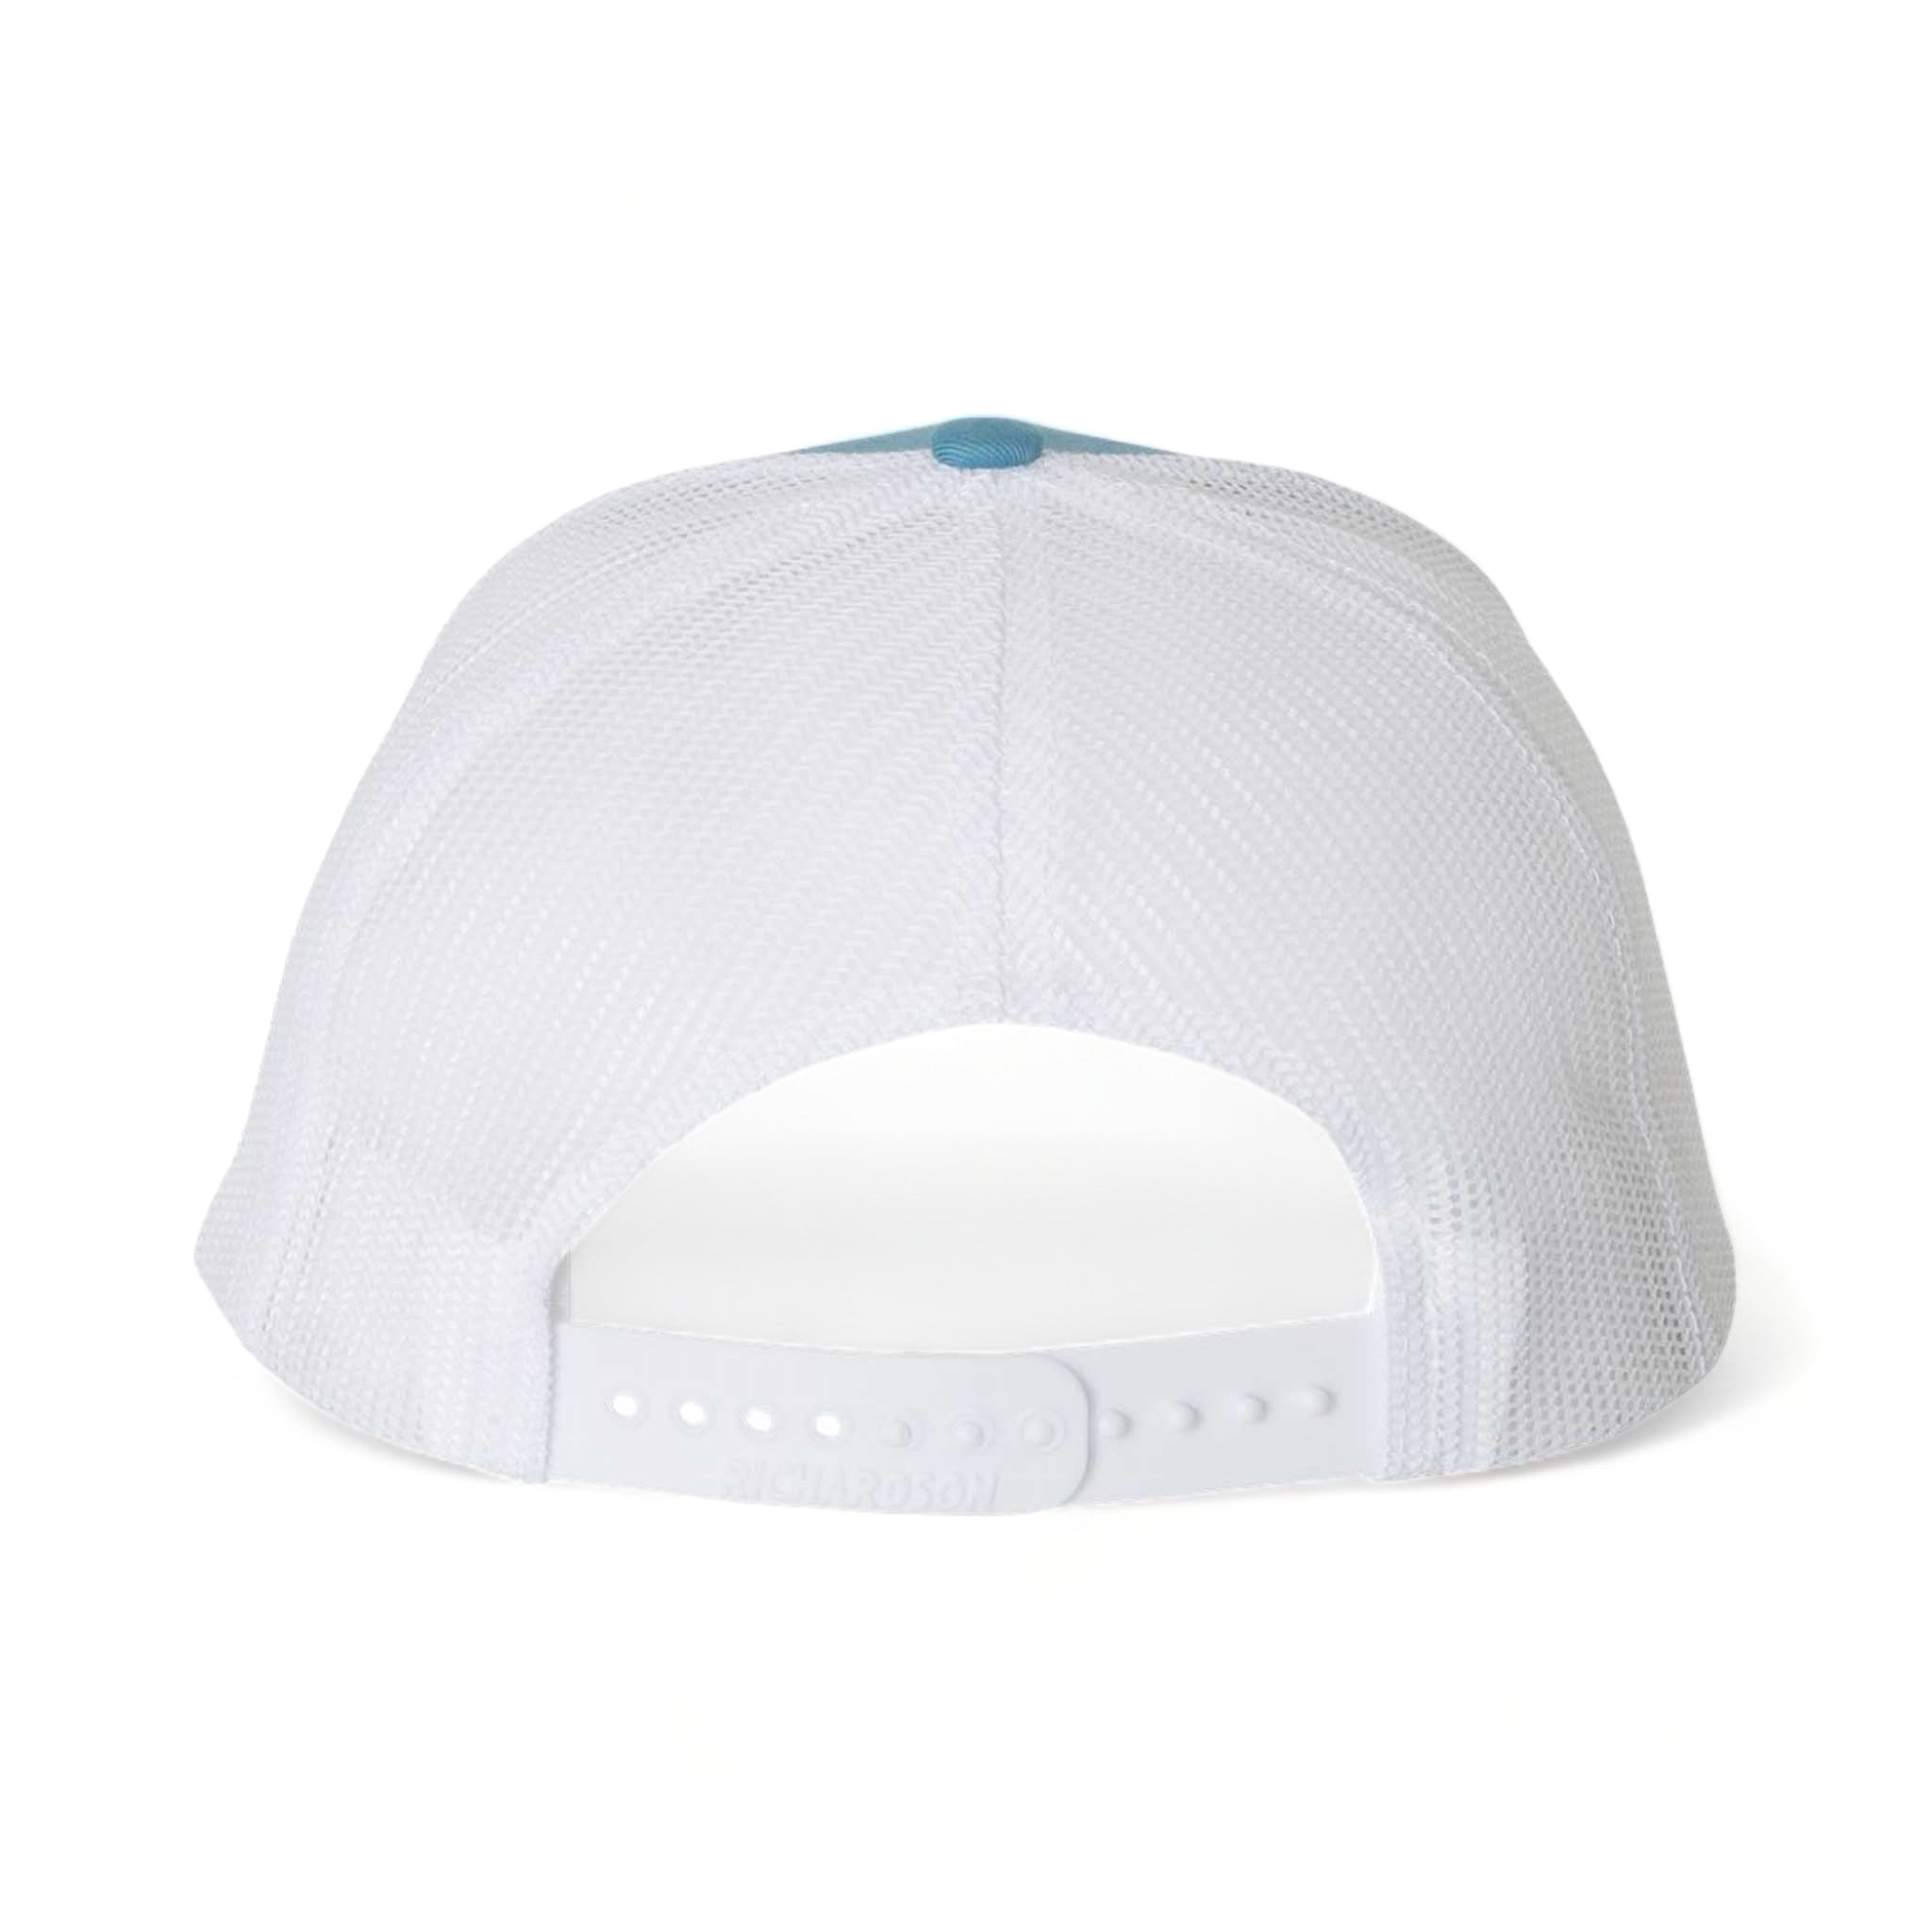 Back view of Richardson 112 custom hat in columbia blue and white